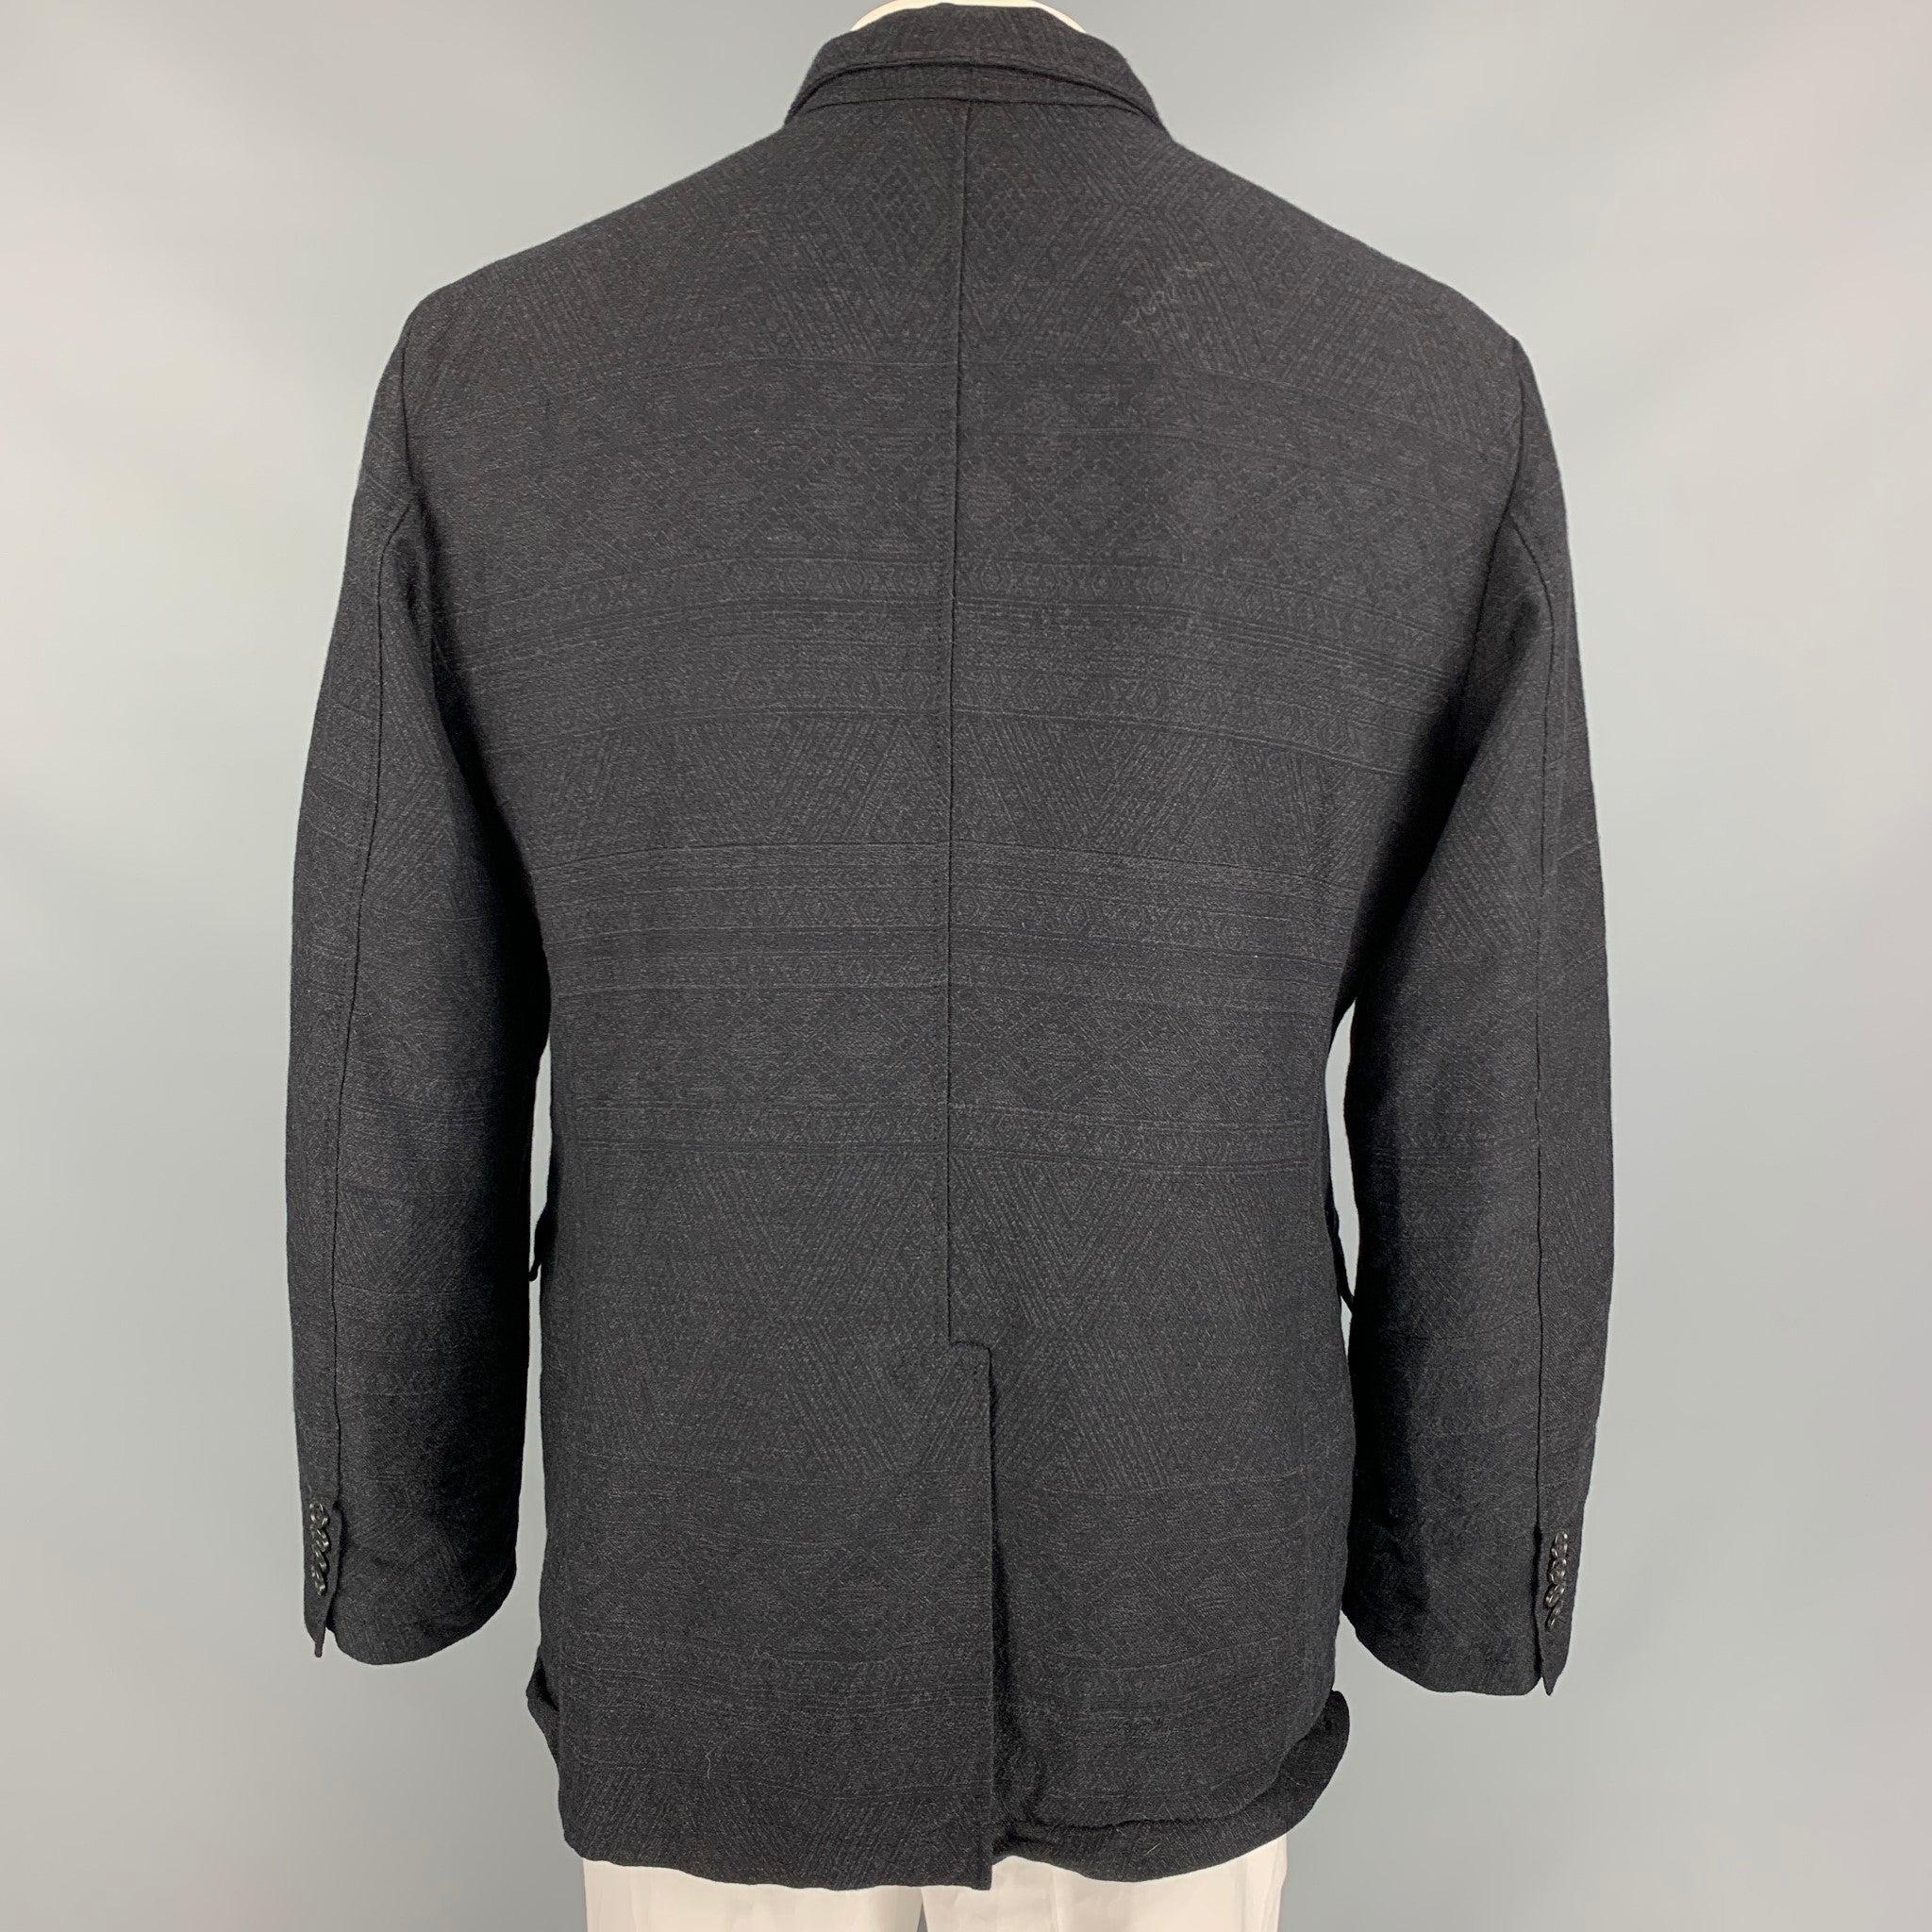 Men's ENGINEERED GARMENTS Size XL Charcoal Textured Cotton / Wool Notch Lapel Jacket For Sale